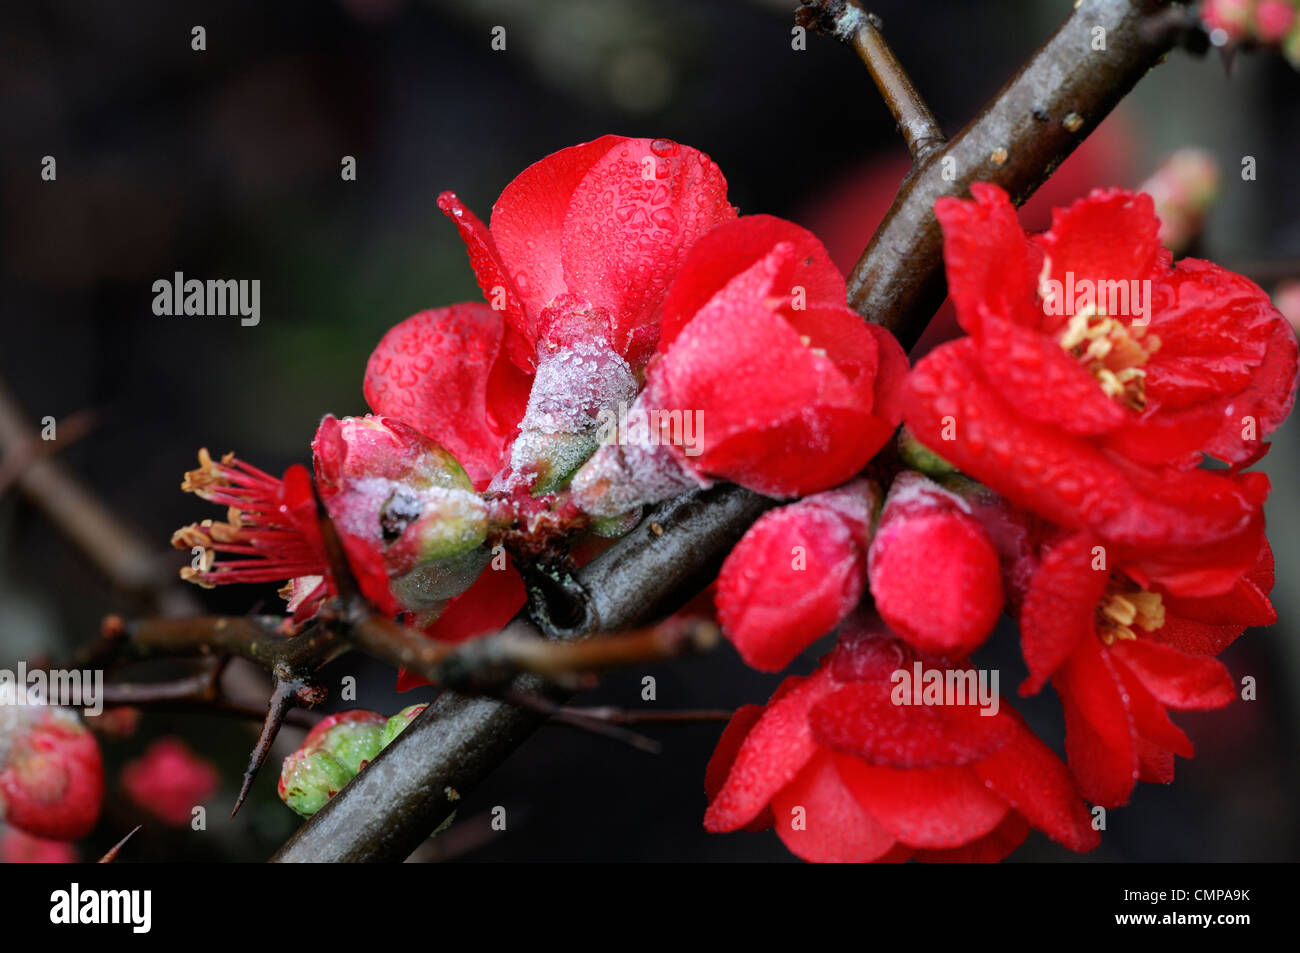 chaenomeles x superba flowering quince spring closeup selective focus plant portraits red flowers blooms shrubs frost damage Stock Photo